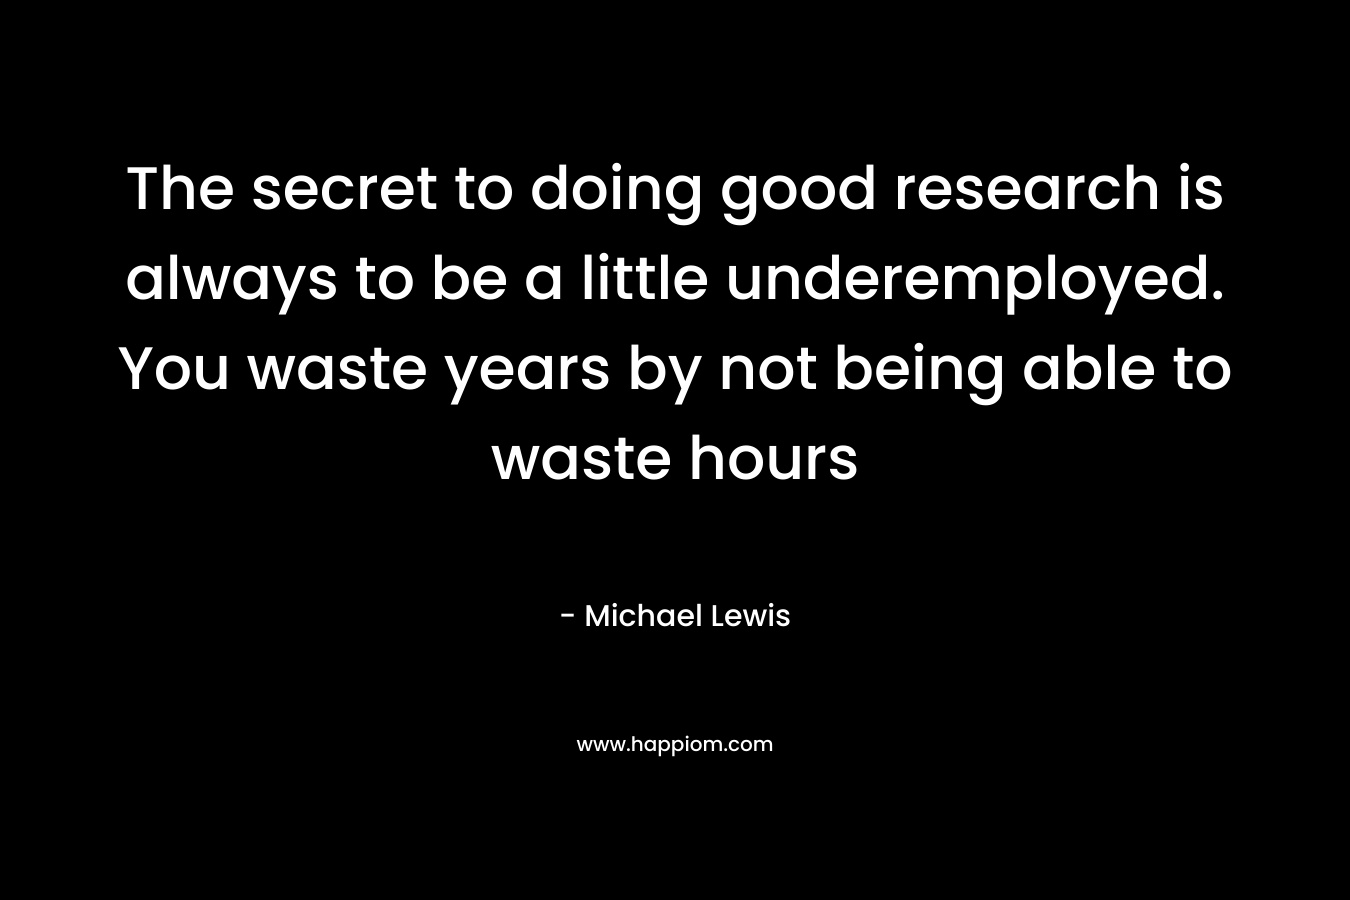 The secret to doing good research is always to be a little underemployed. You waste years by not being able to waste hours